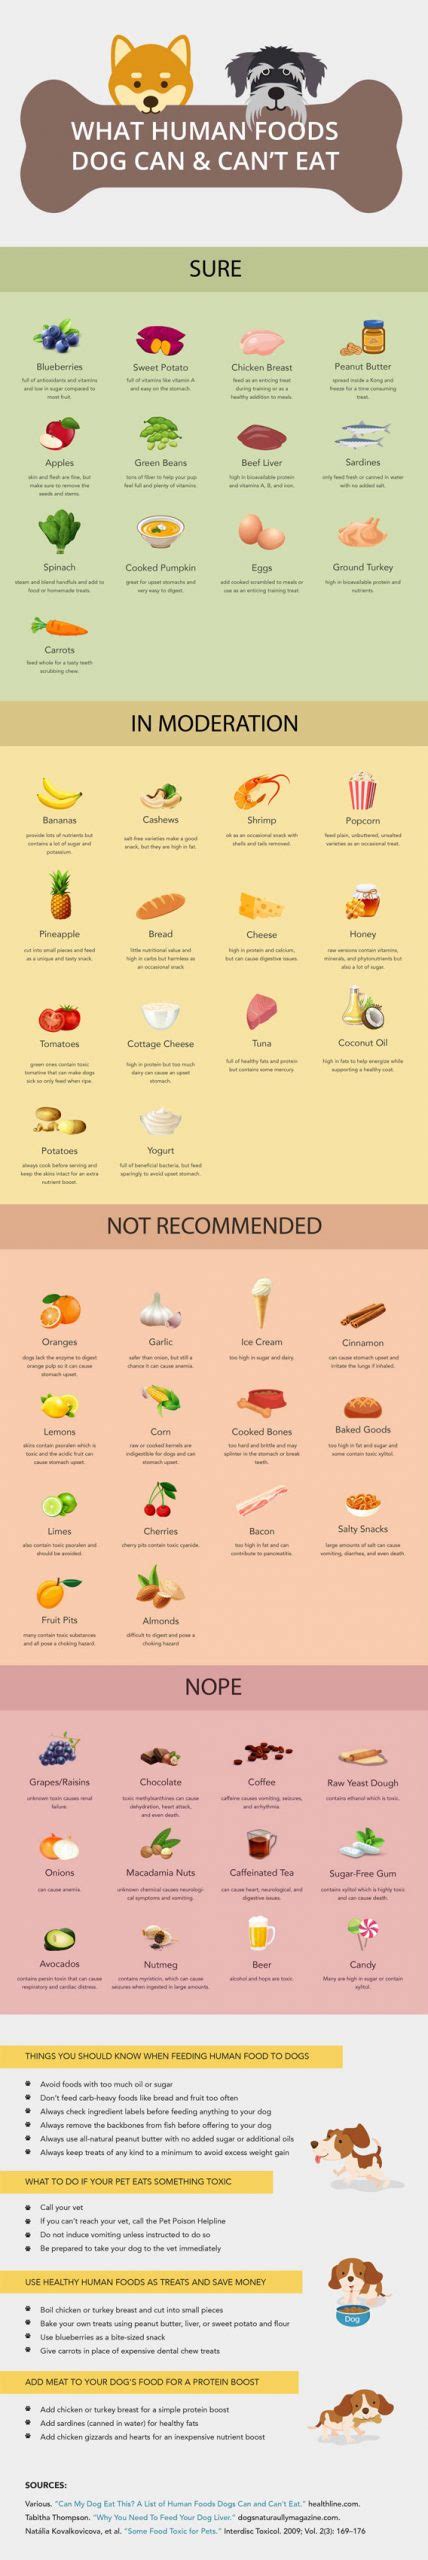 We have compiled a detailed list of the foods dogs can and can't eat below. What Human Foods Dogs Can & Can't Eat - Best Infographics